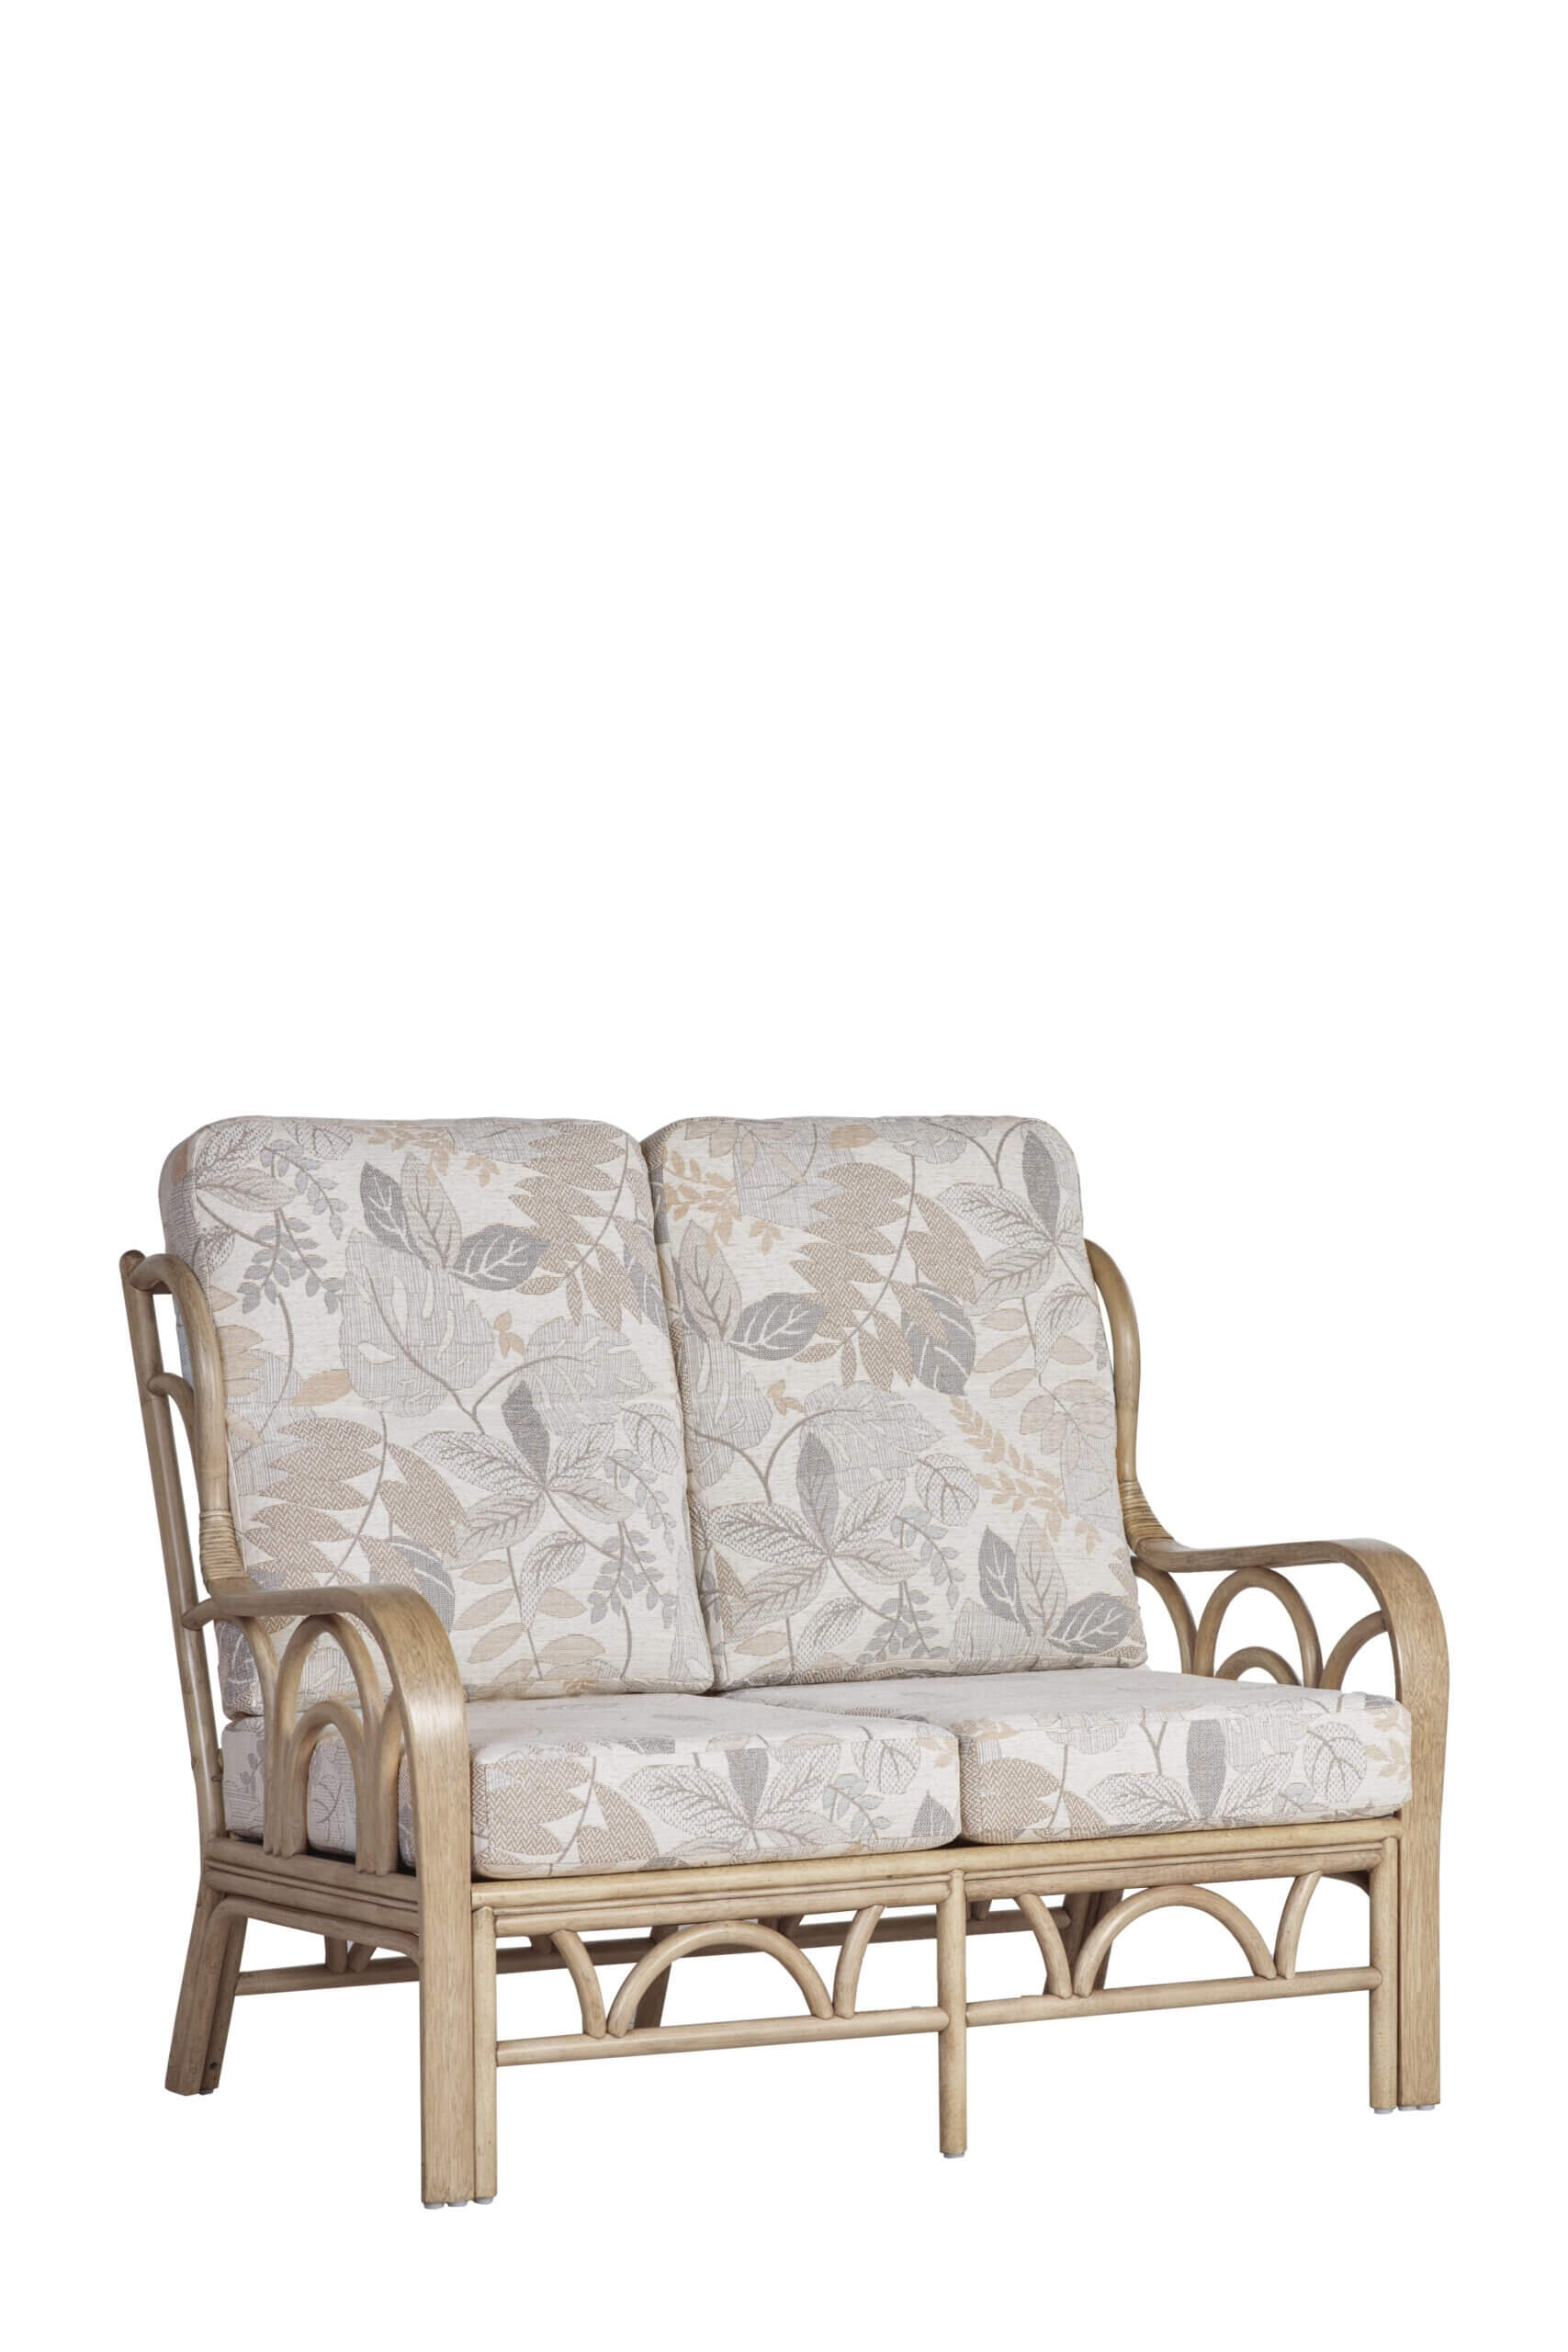 Showing image for Catania 2-seater sofa